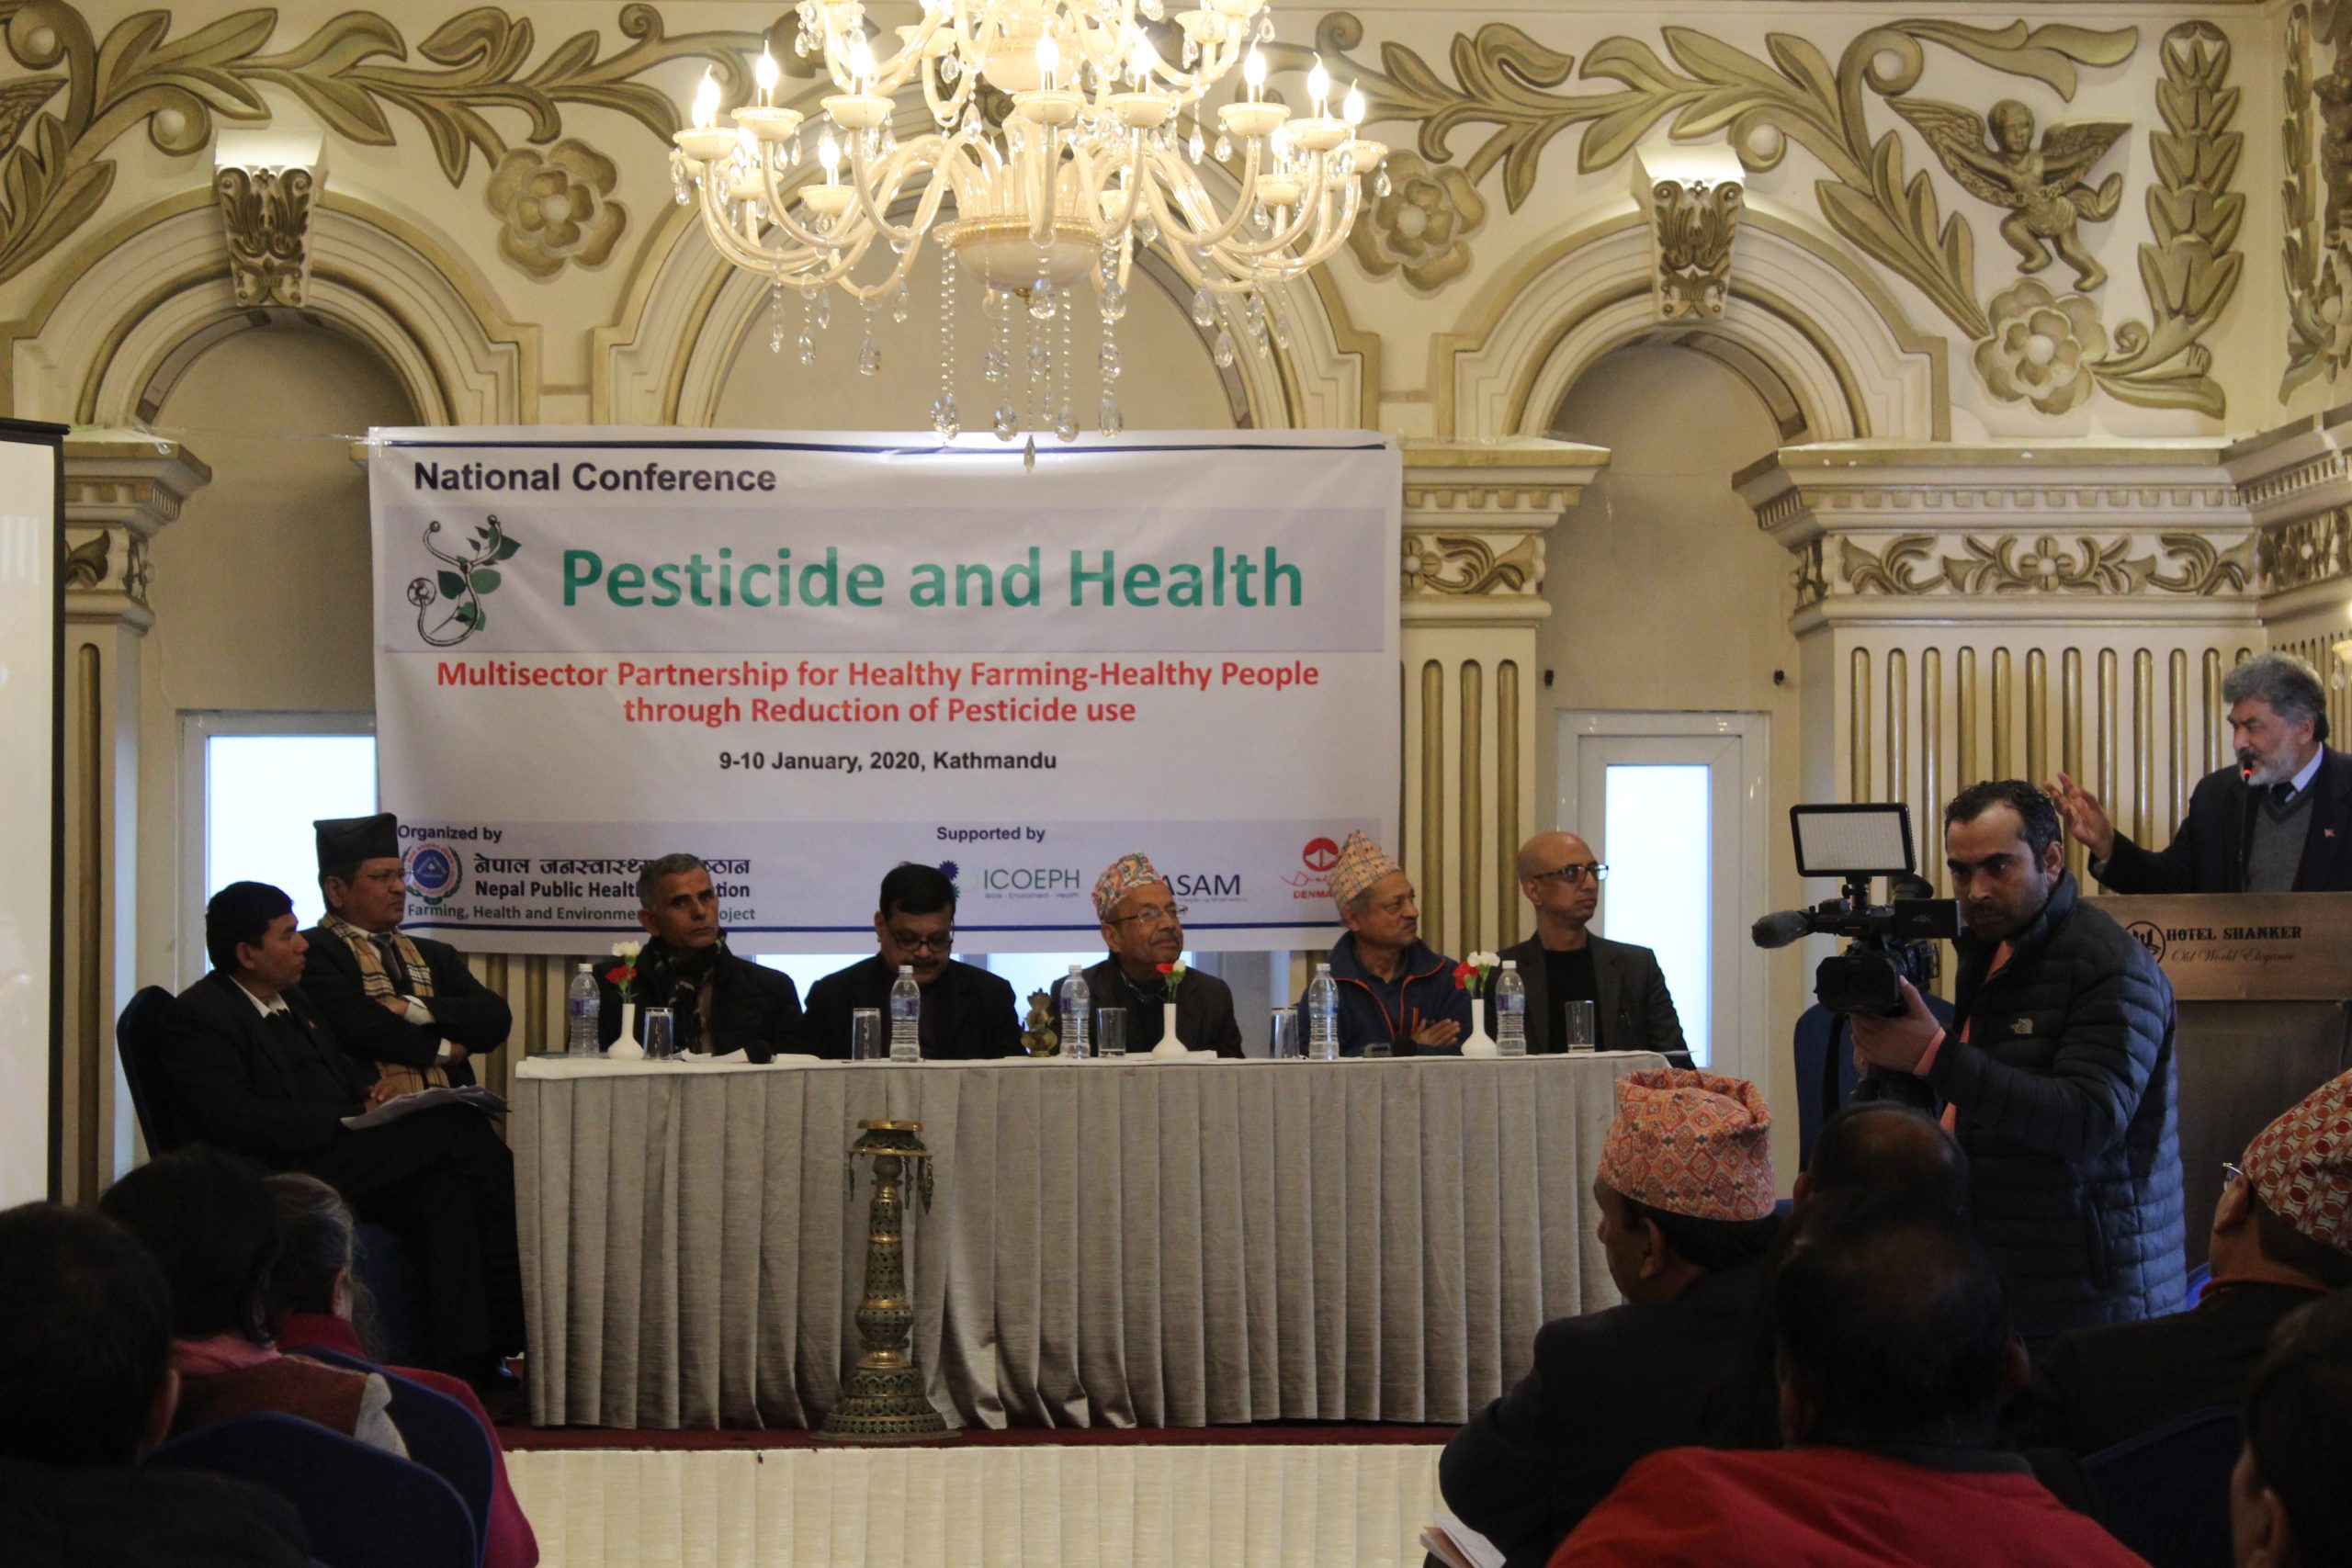 National Conference on Pesticide and Health Multisector Partnership for Health Farming- Healthy People Through Reduction of Pesticide Use